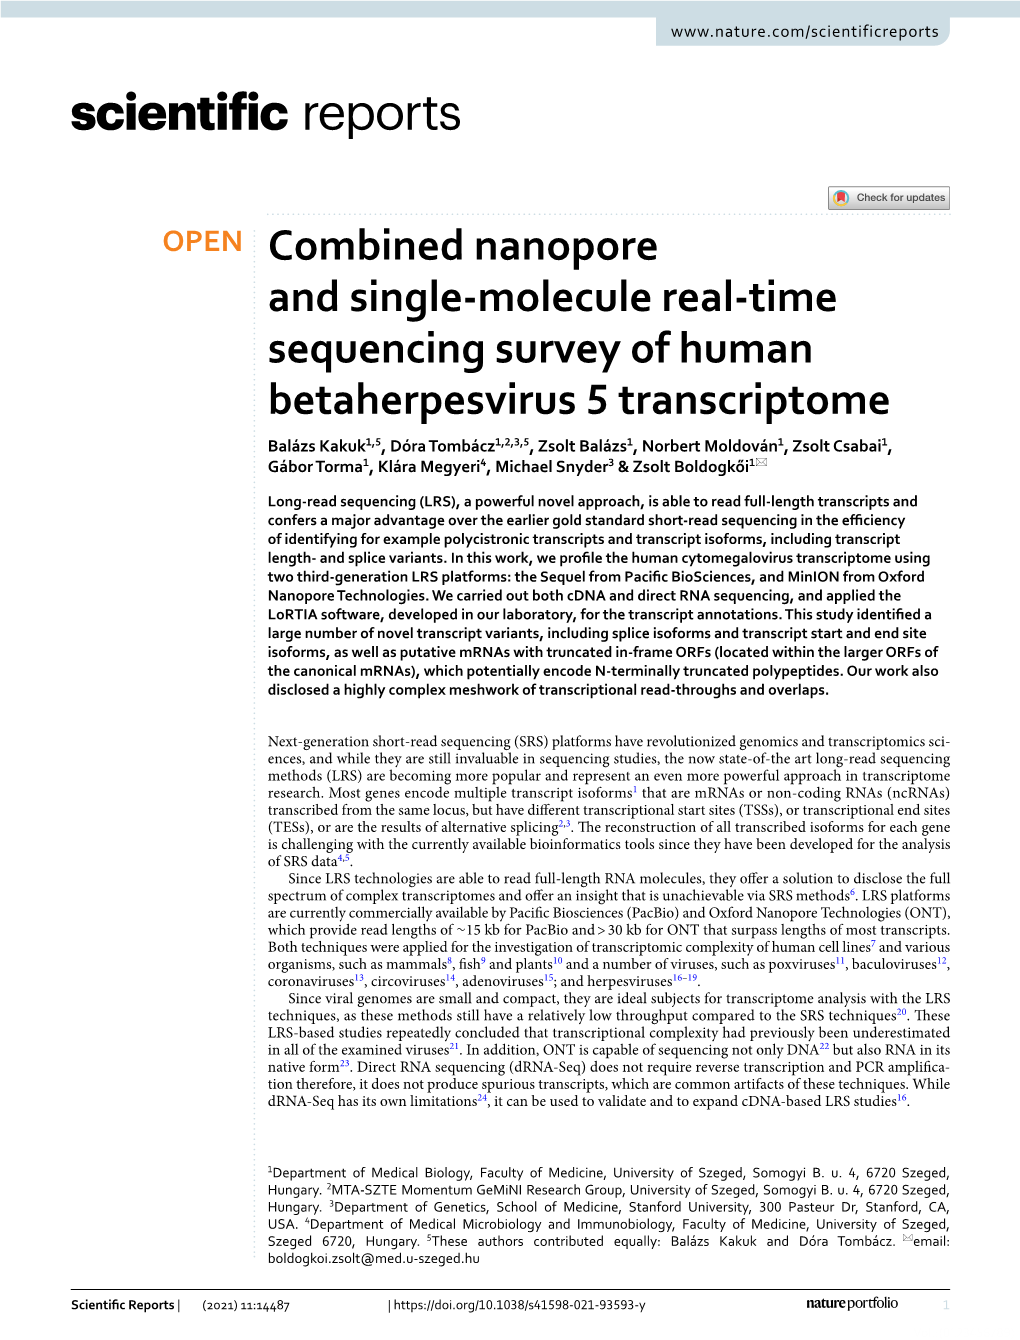 Combined Nanopore and Single-Molecule Real-Time